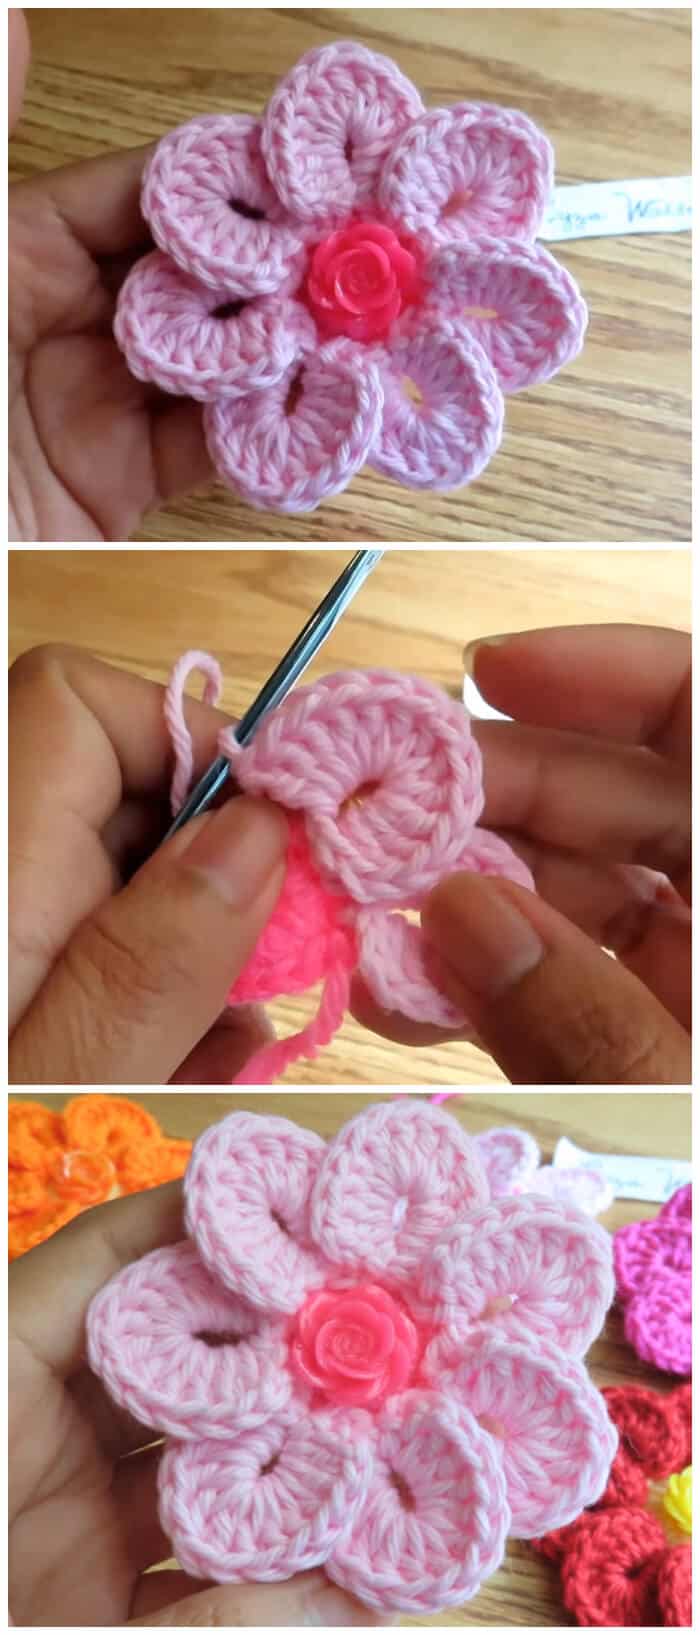 Tutorial is for Crochet 7 Petals Flower that serves as an applique and/or embellishment for hats accessory, beanies, headband and more...
